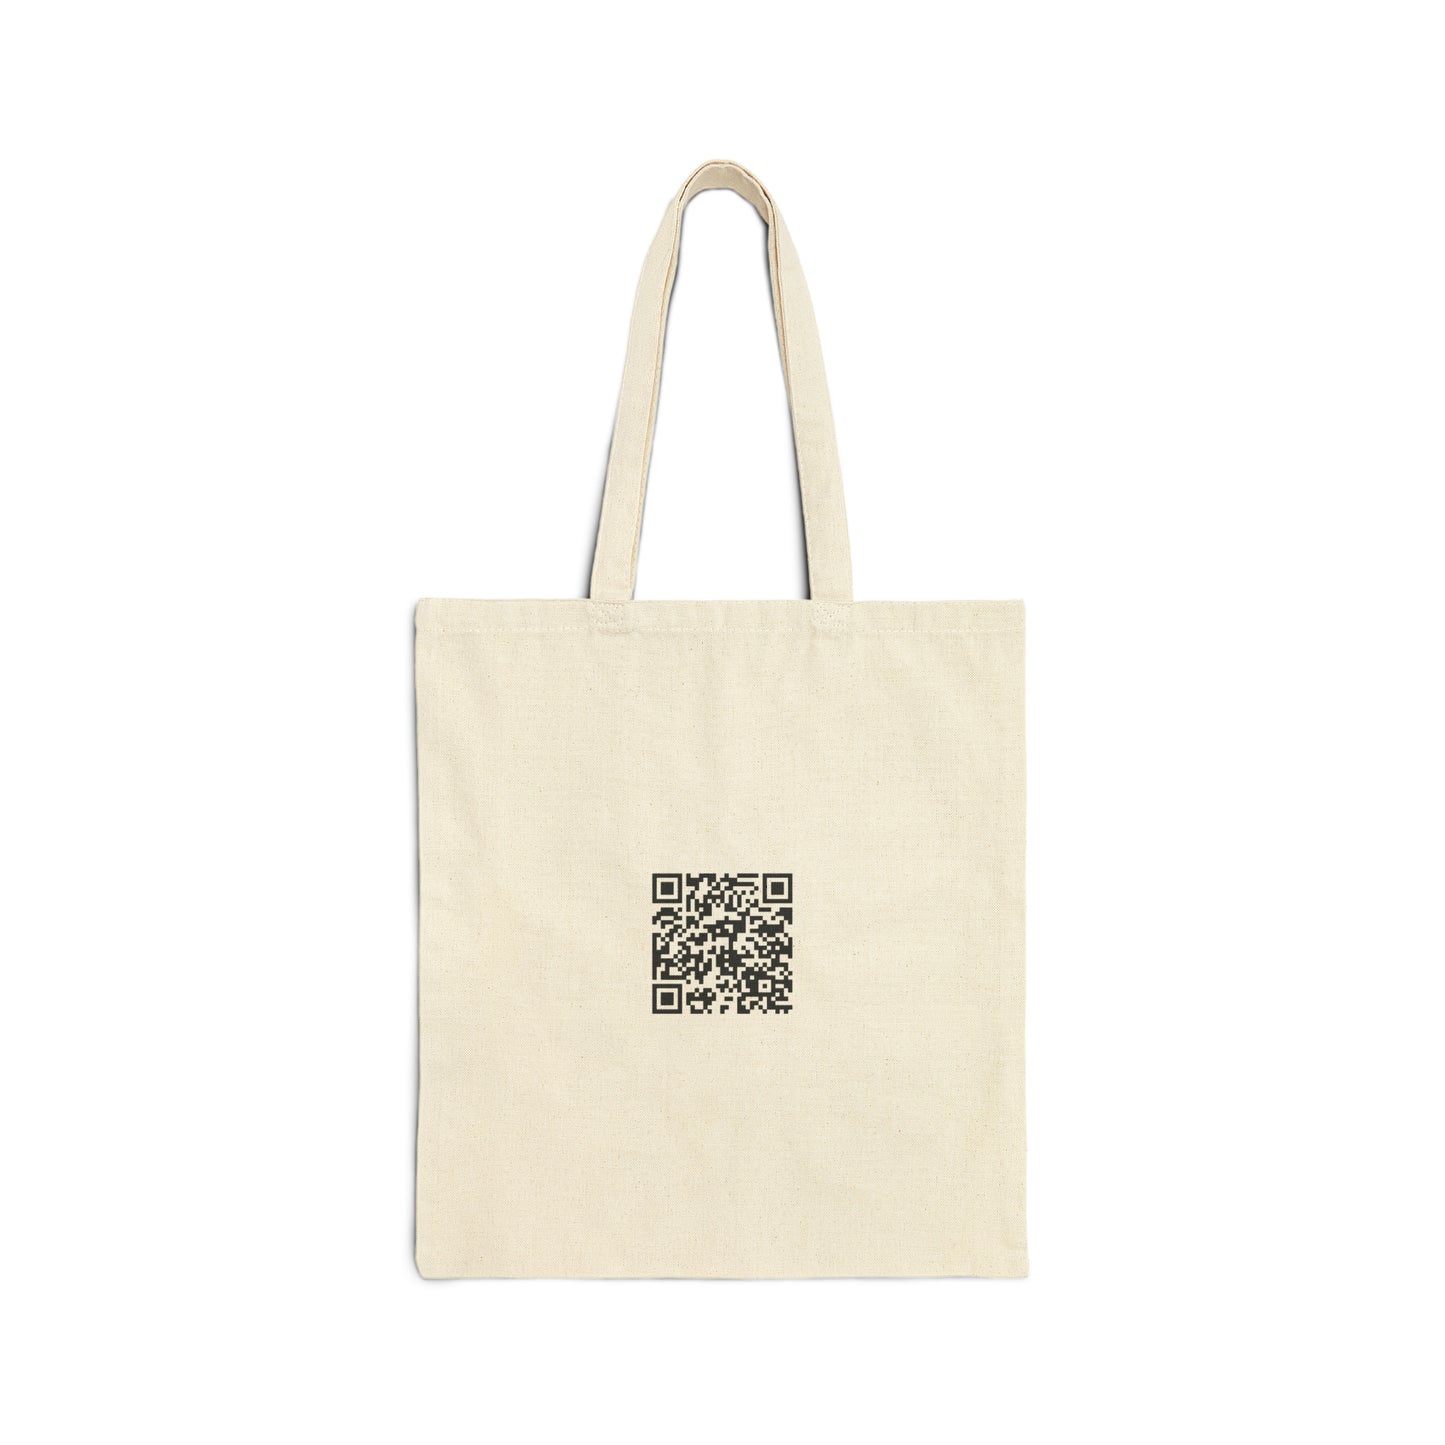 A Covenant Of Spies - Cotton Canvas Tote Bag